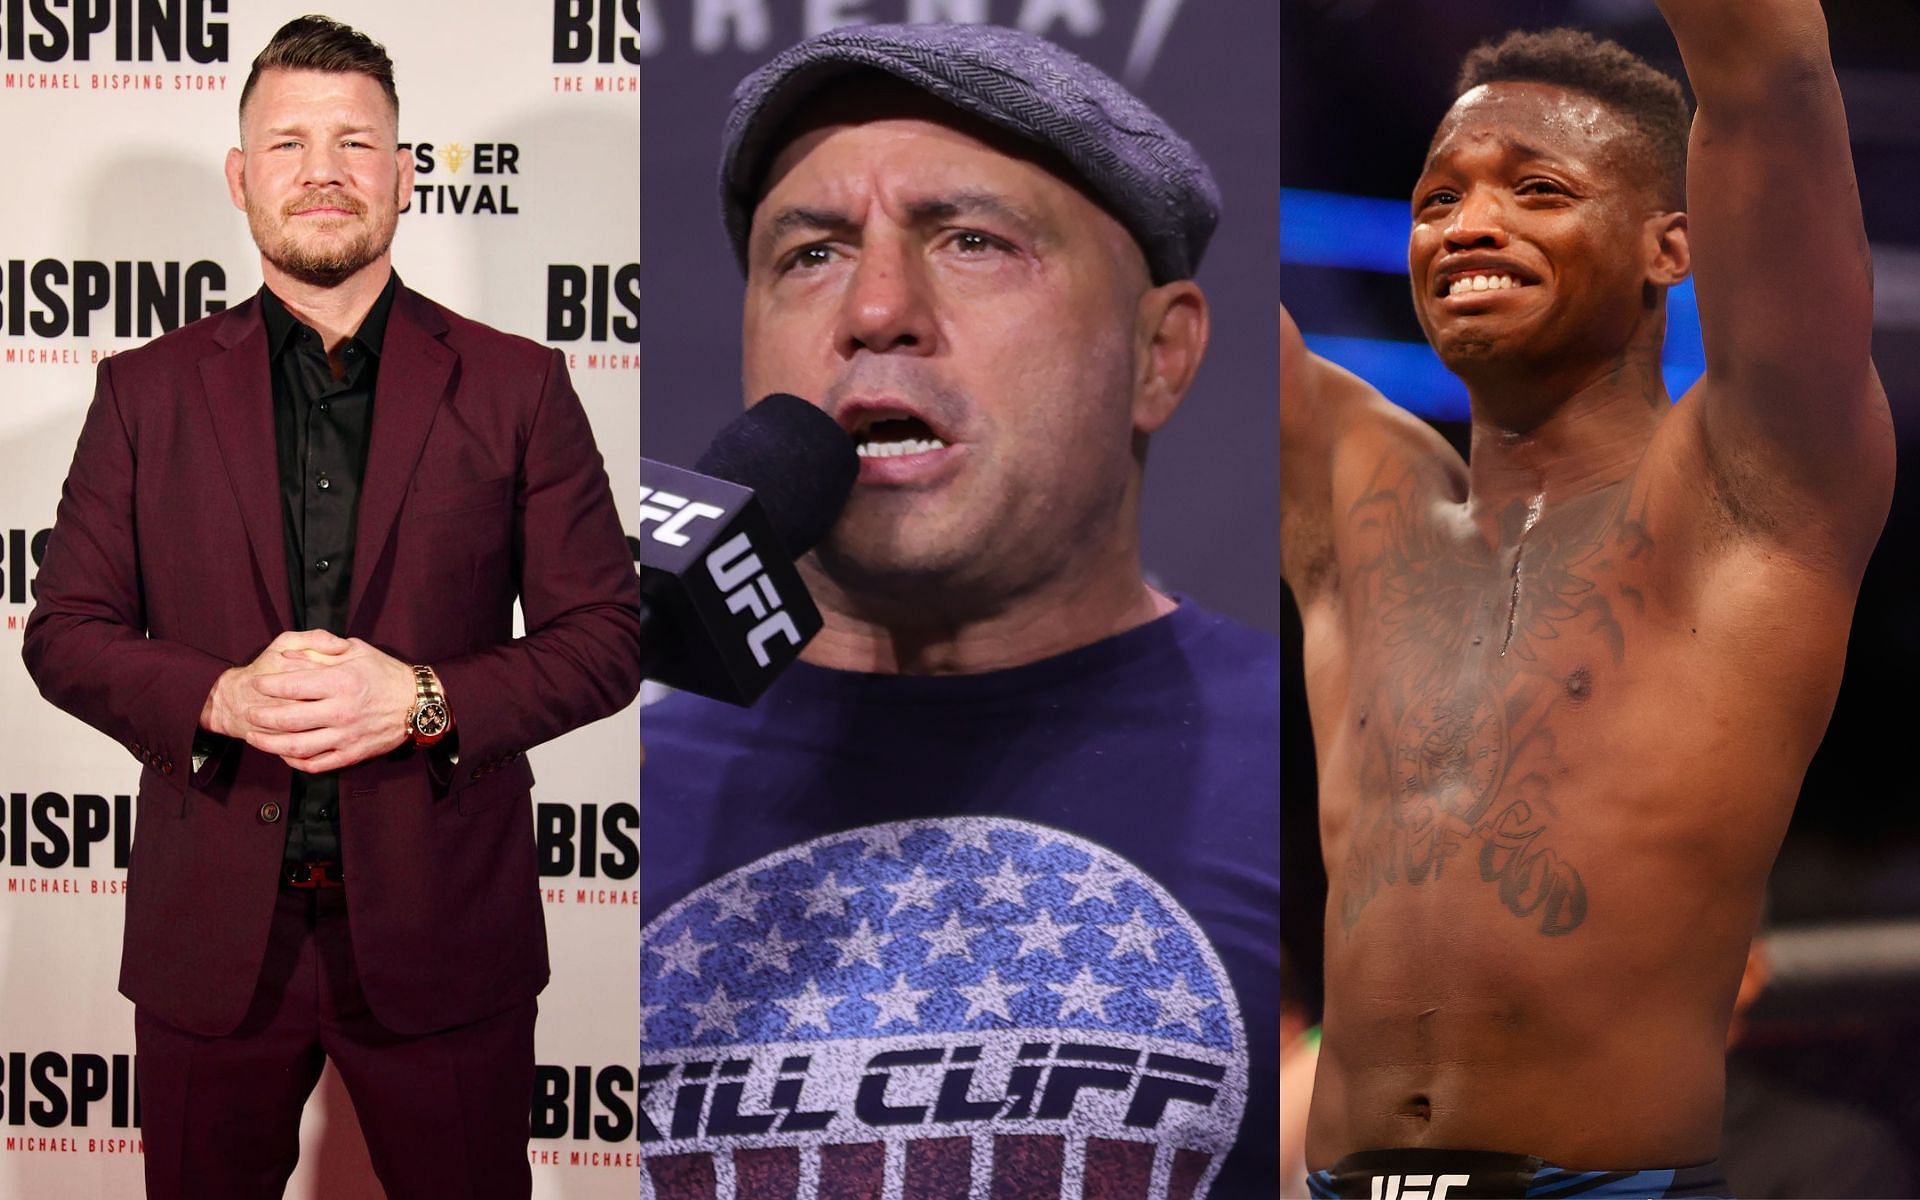 Michael Bisping (left, image courtesy of @mikebisping Instagram); Joe Rogan and Terrance McKinney (center and right, images courtesy of Getty)